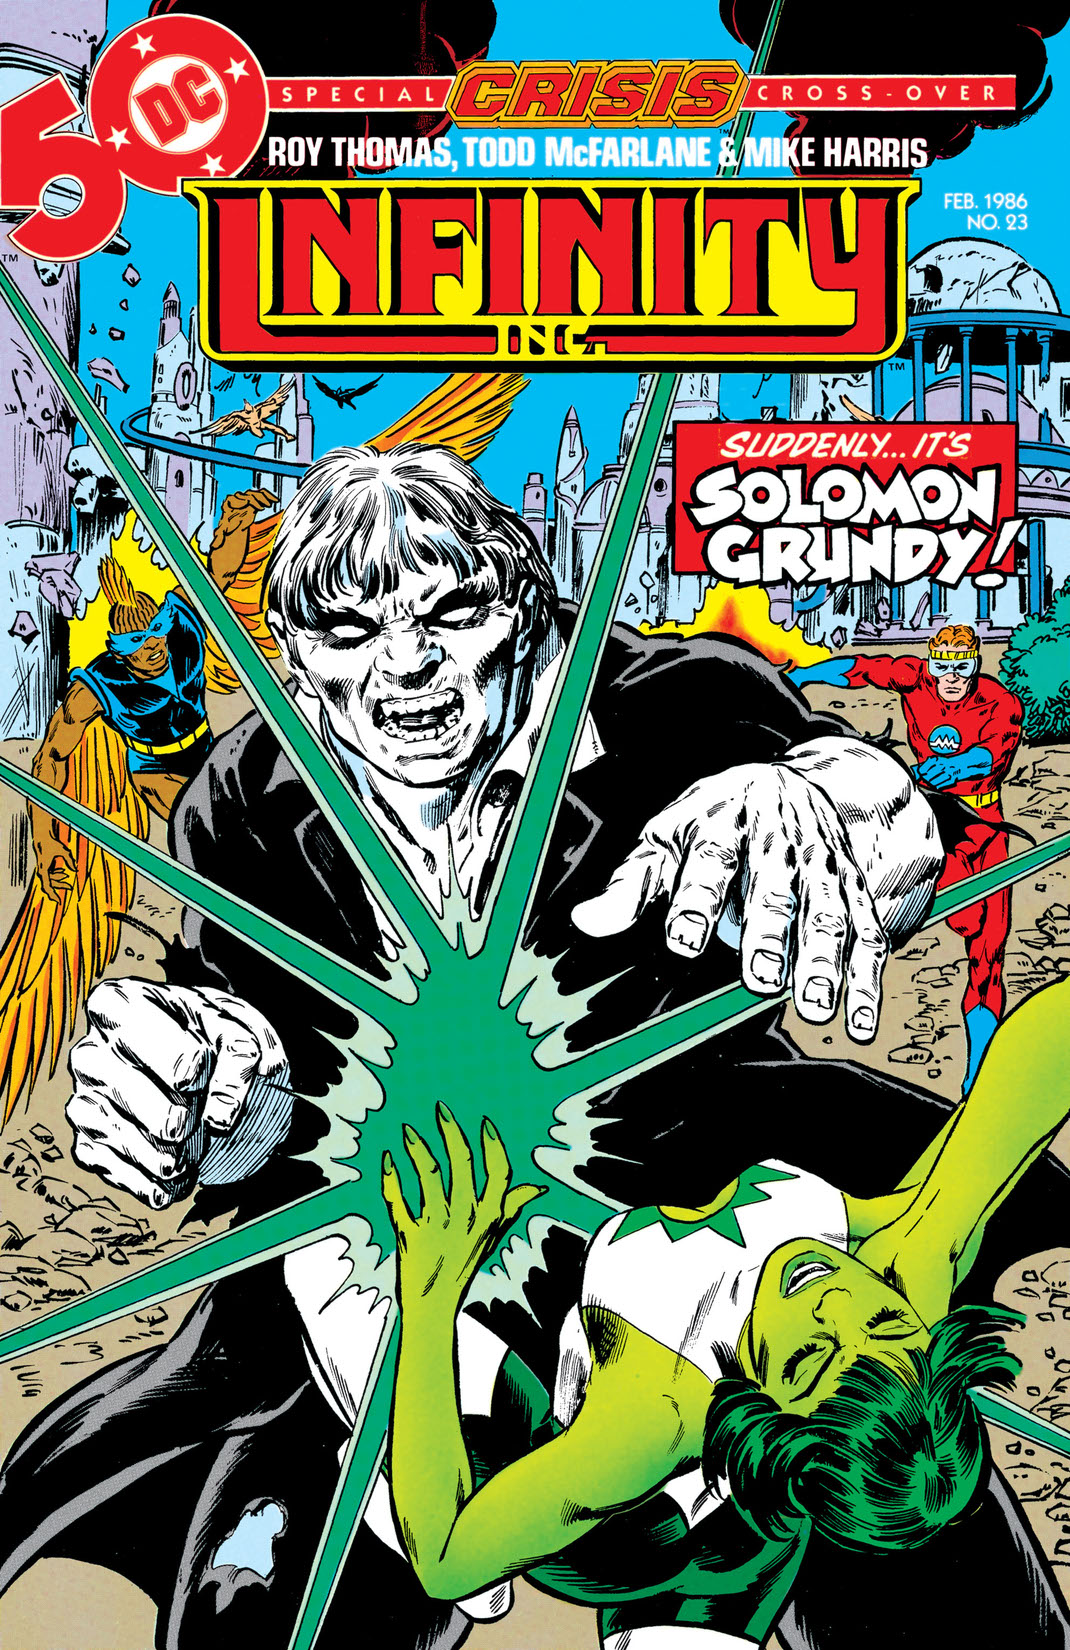 Infinity, Inc. (1984-) #23 preview images